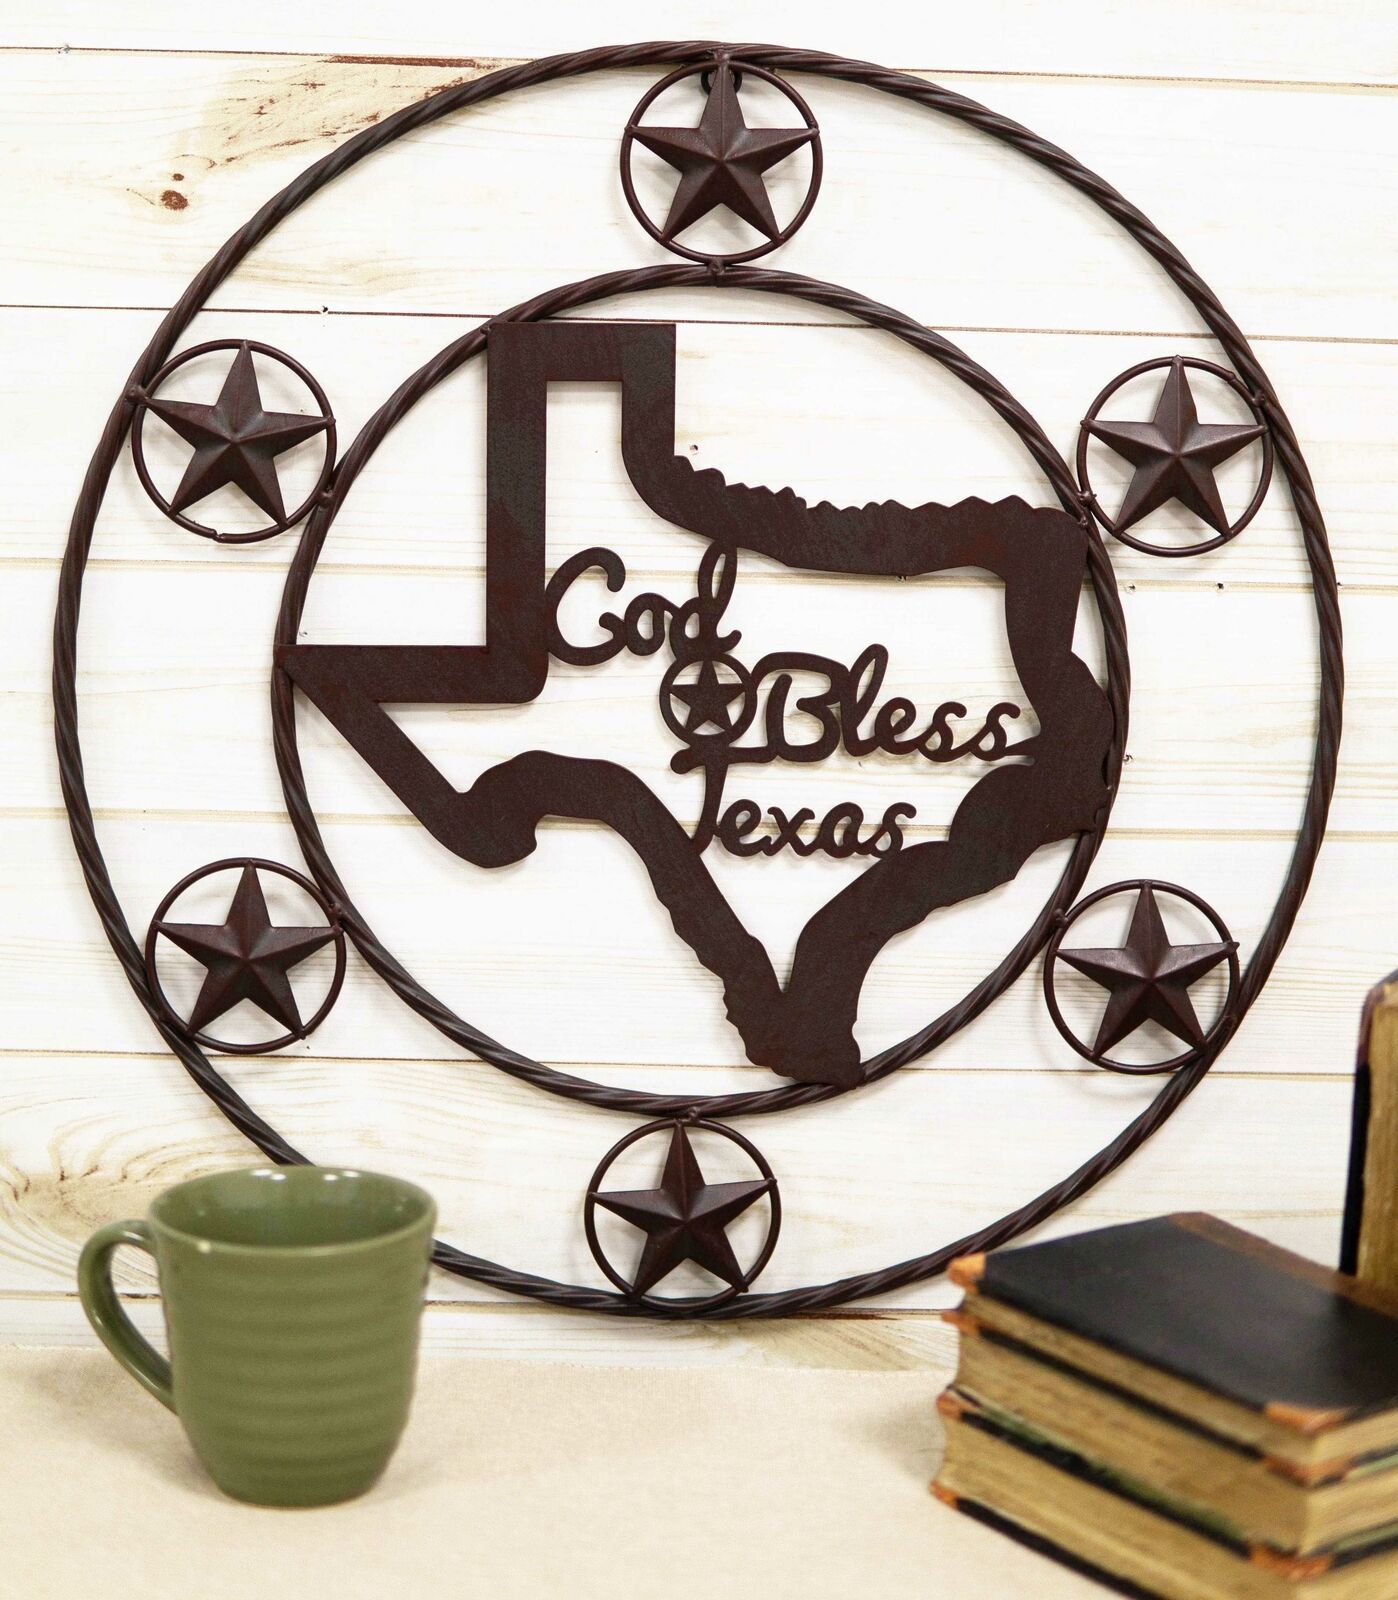 20D Vintage Rustic Western Star God Bless Texas Metal Circle Wall Hanging Decor